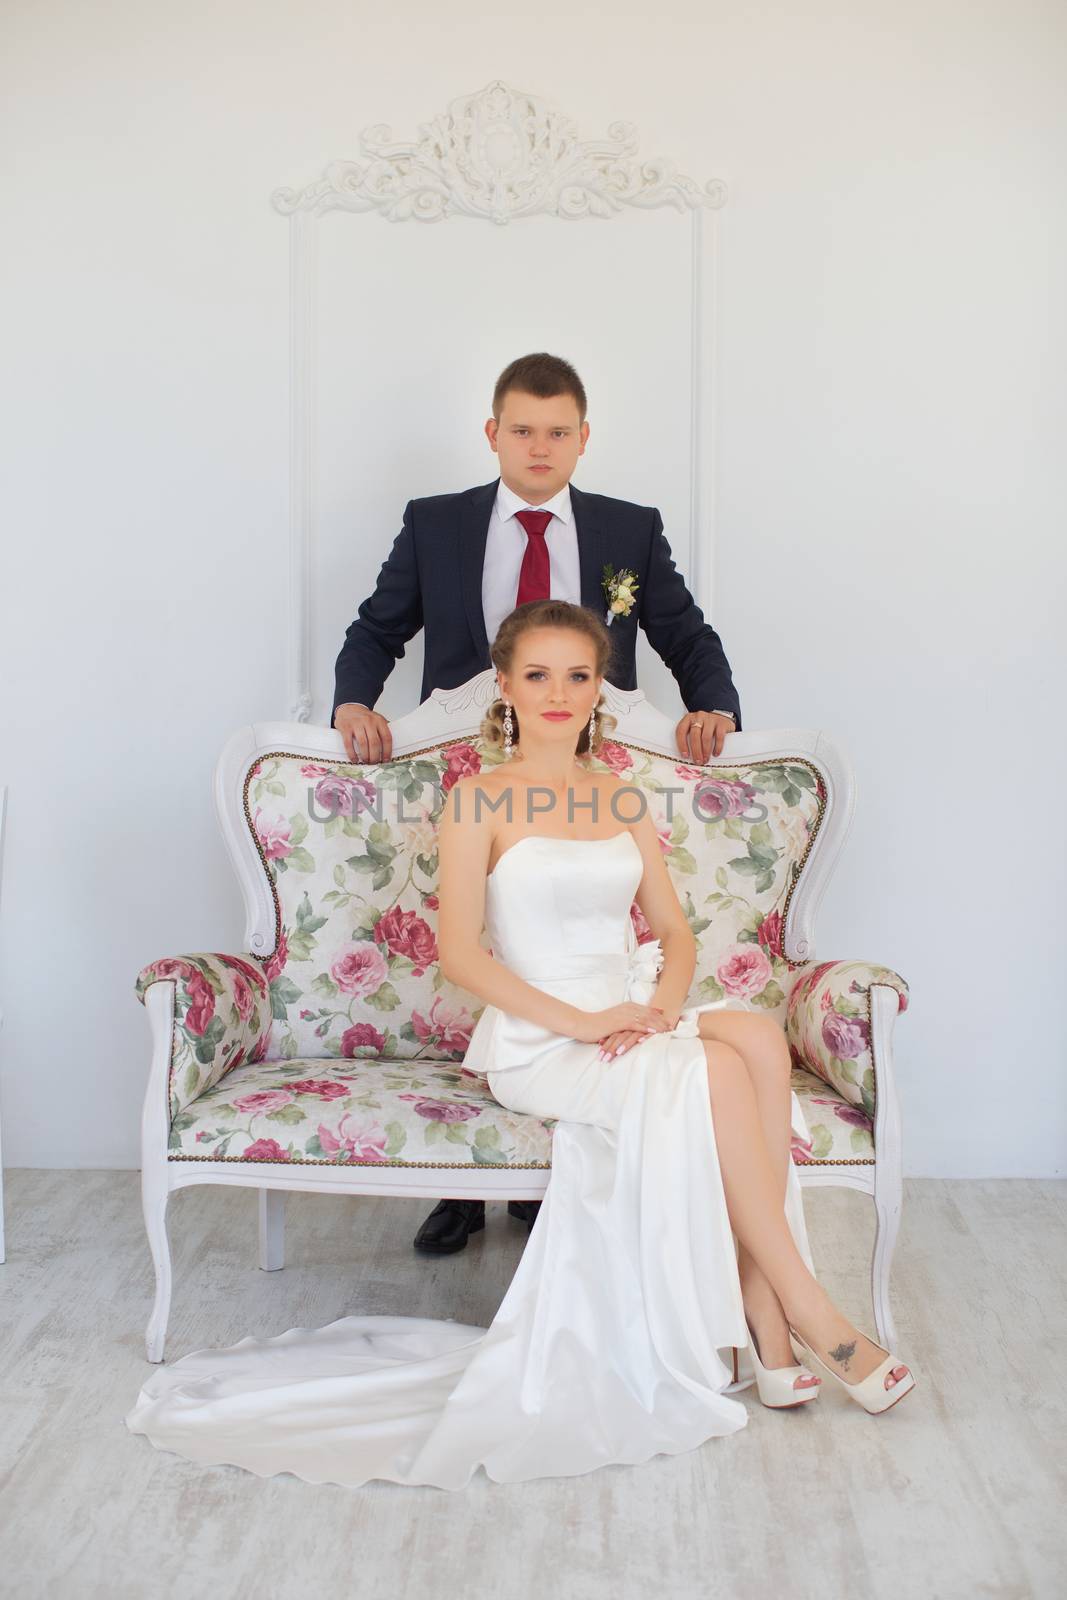 Stylish newlyweds posing in the photo by lanser314